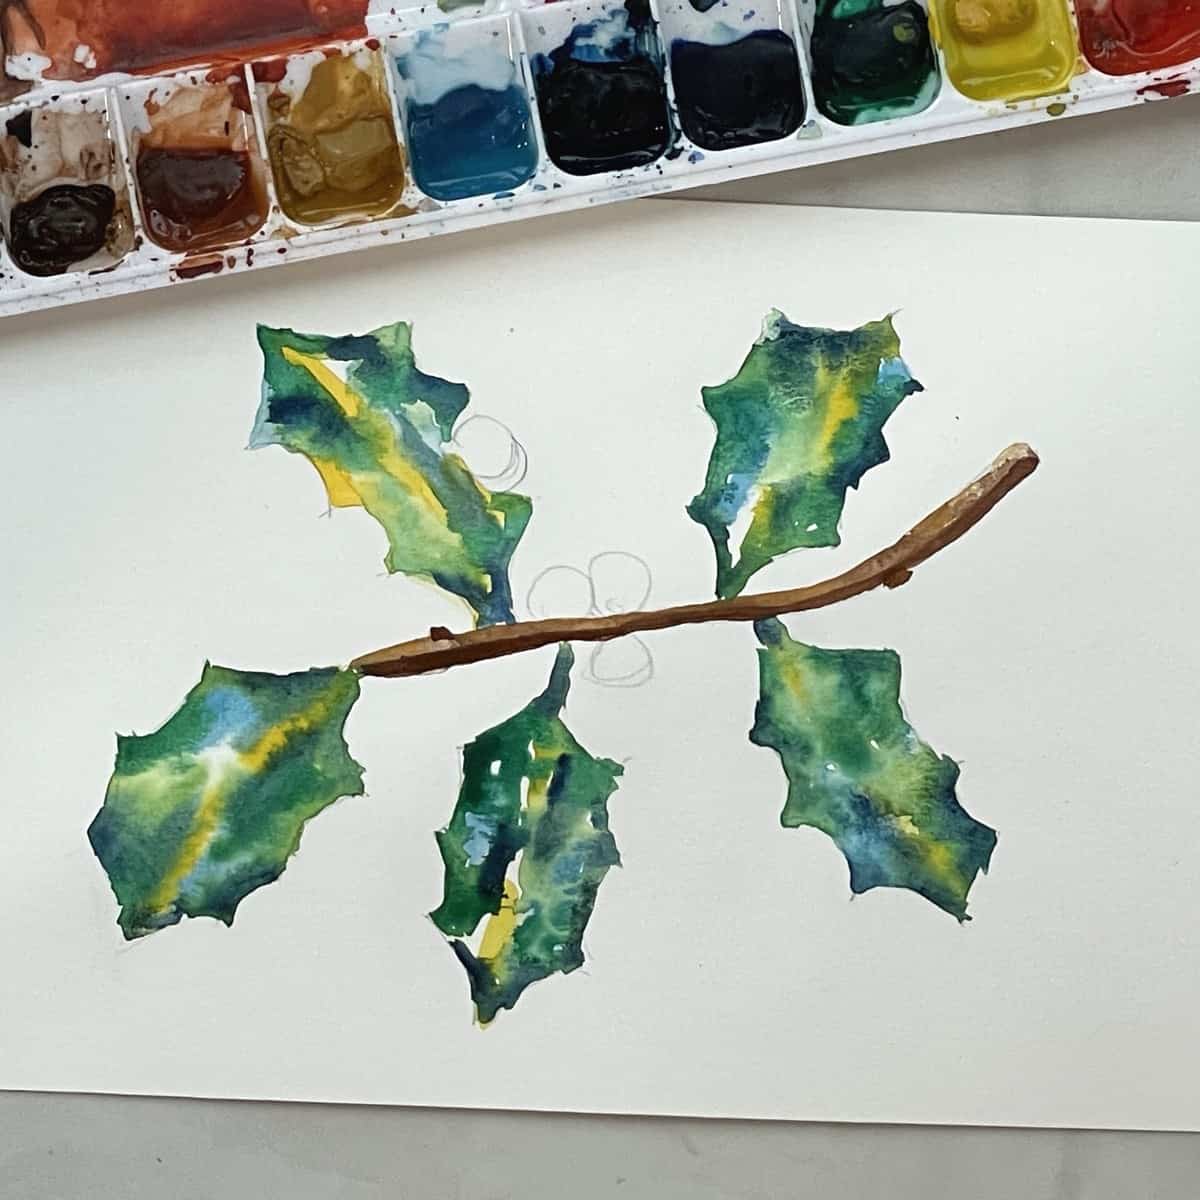 A watercolor painting of a sprig of holly with the leaves and stem painted in next to a watercolor palette.